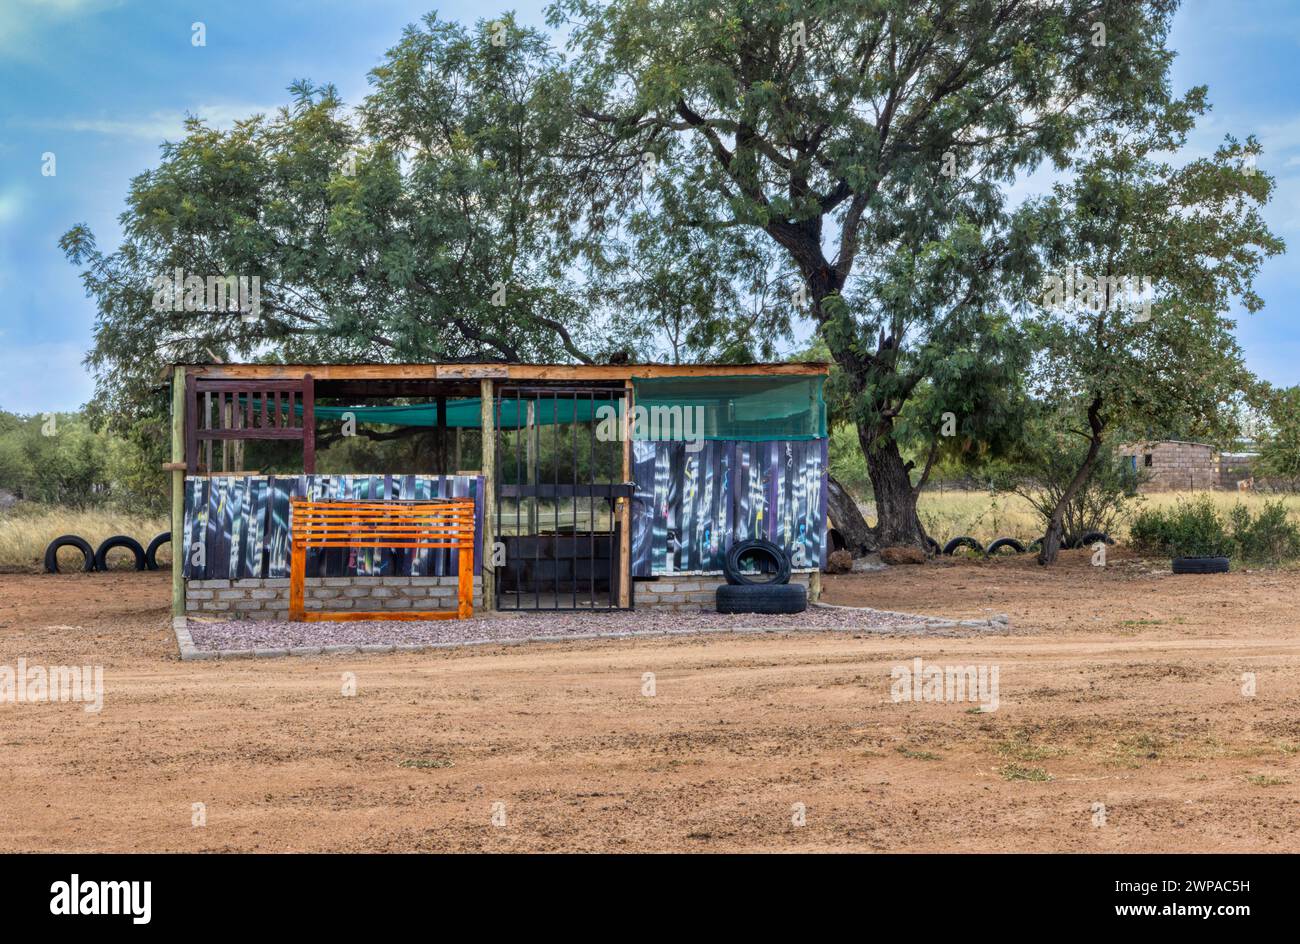 shack for street vendor in south africa on the side of the road, no people Stock Photo